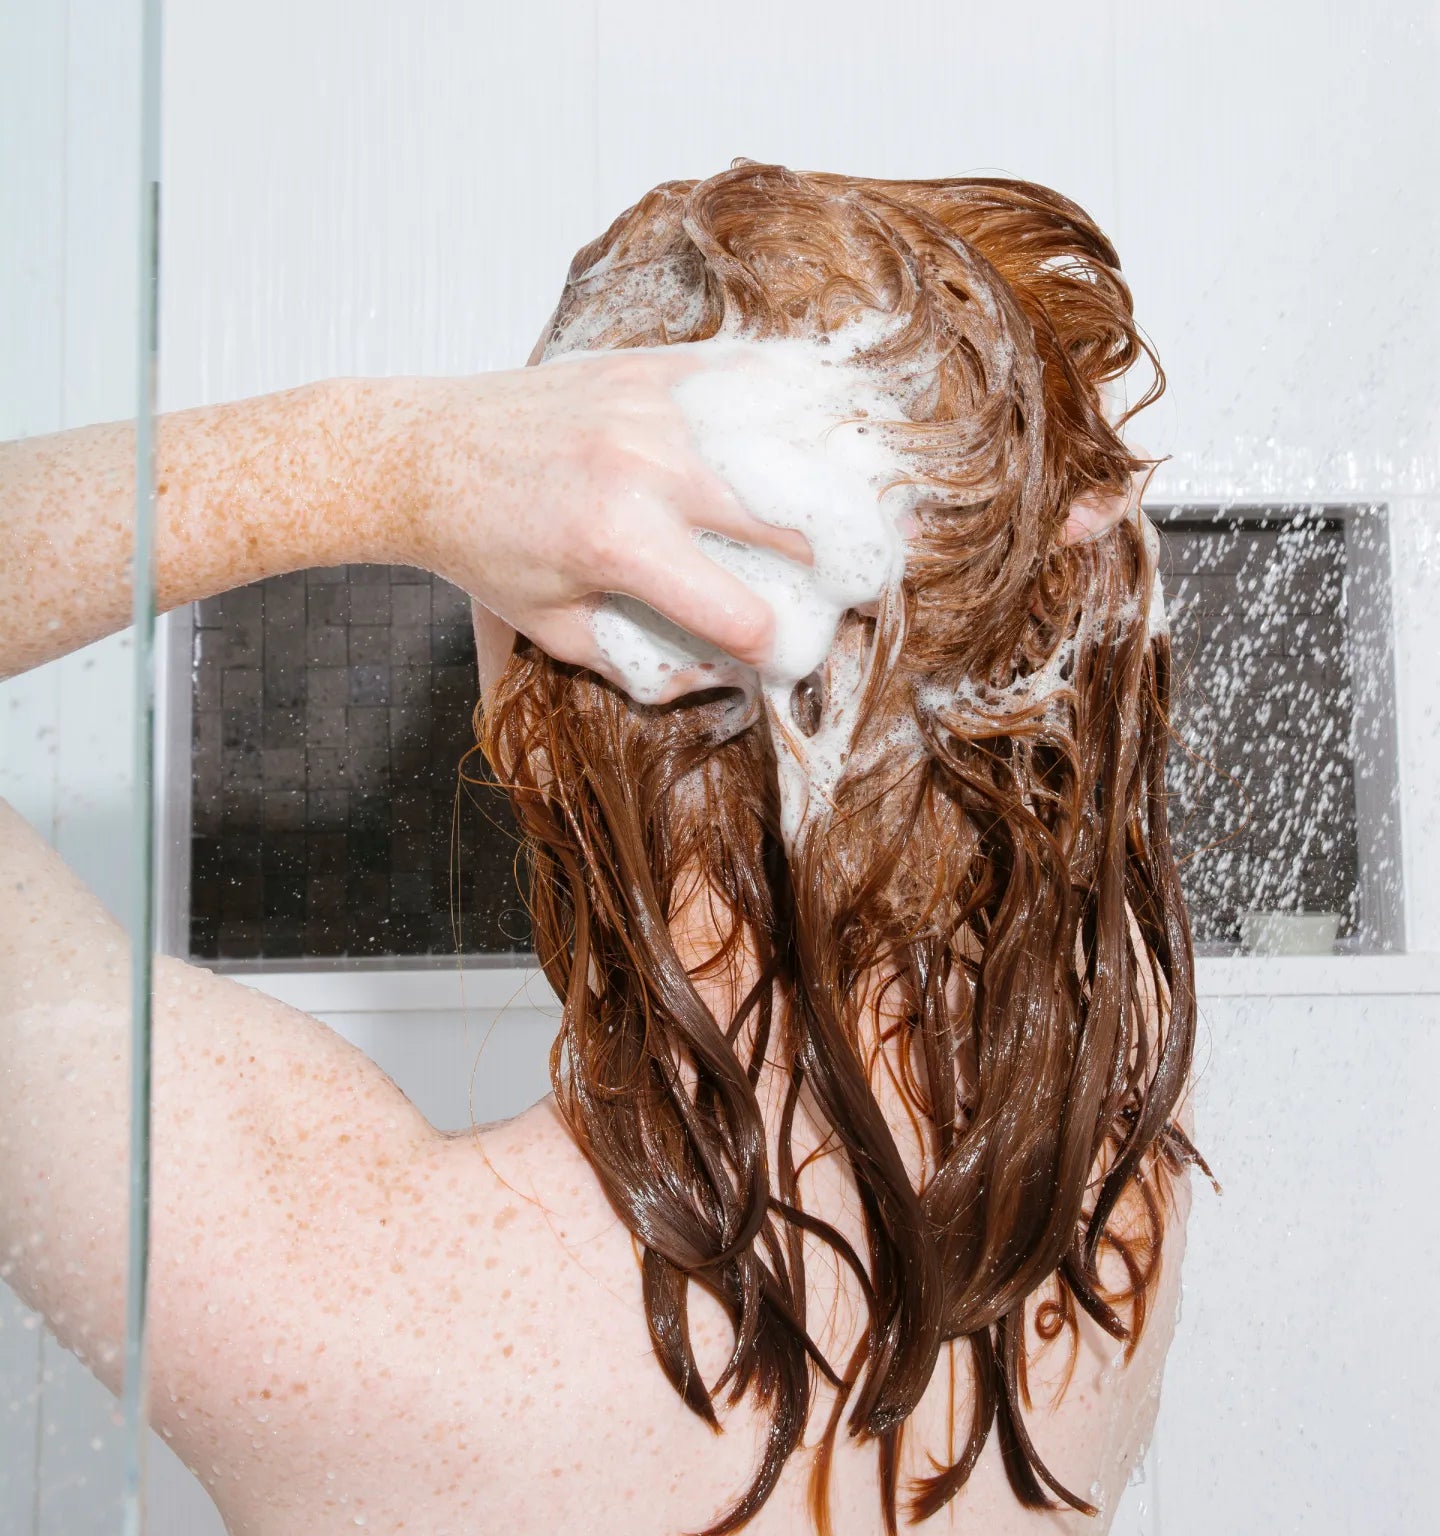 Natural shampoo that is safe for colour treated hair like red hair.